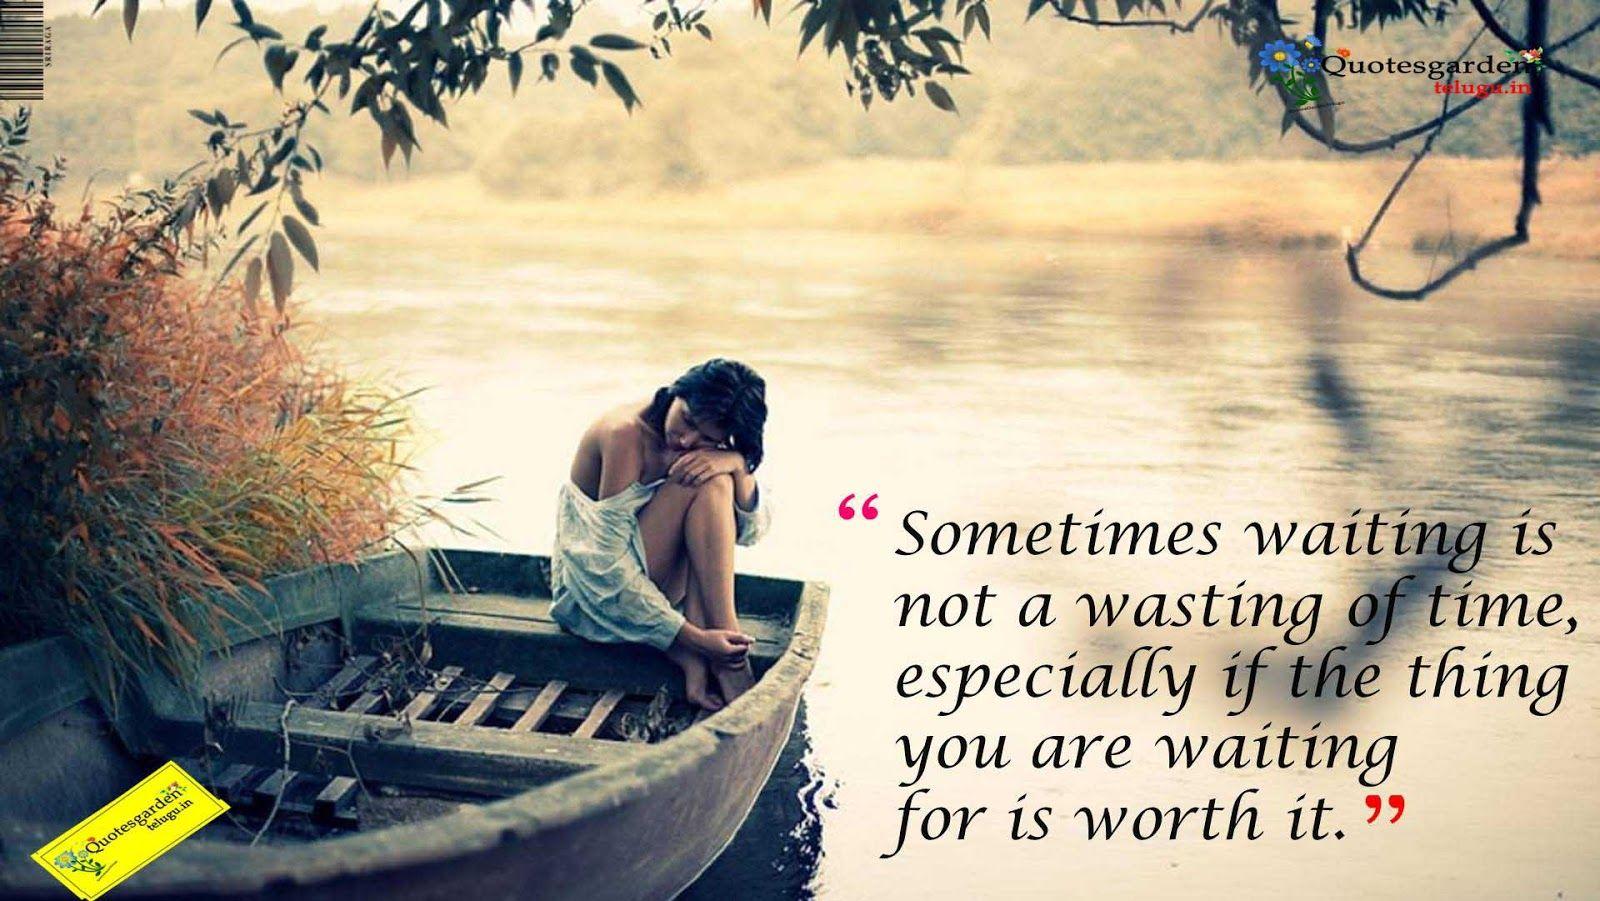 Heart Touching Sad Life Quotes Images  Pictures